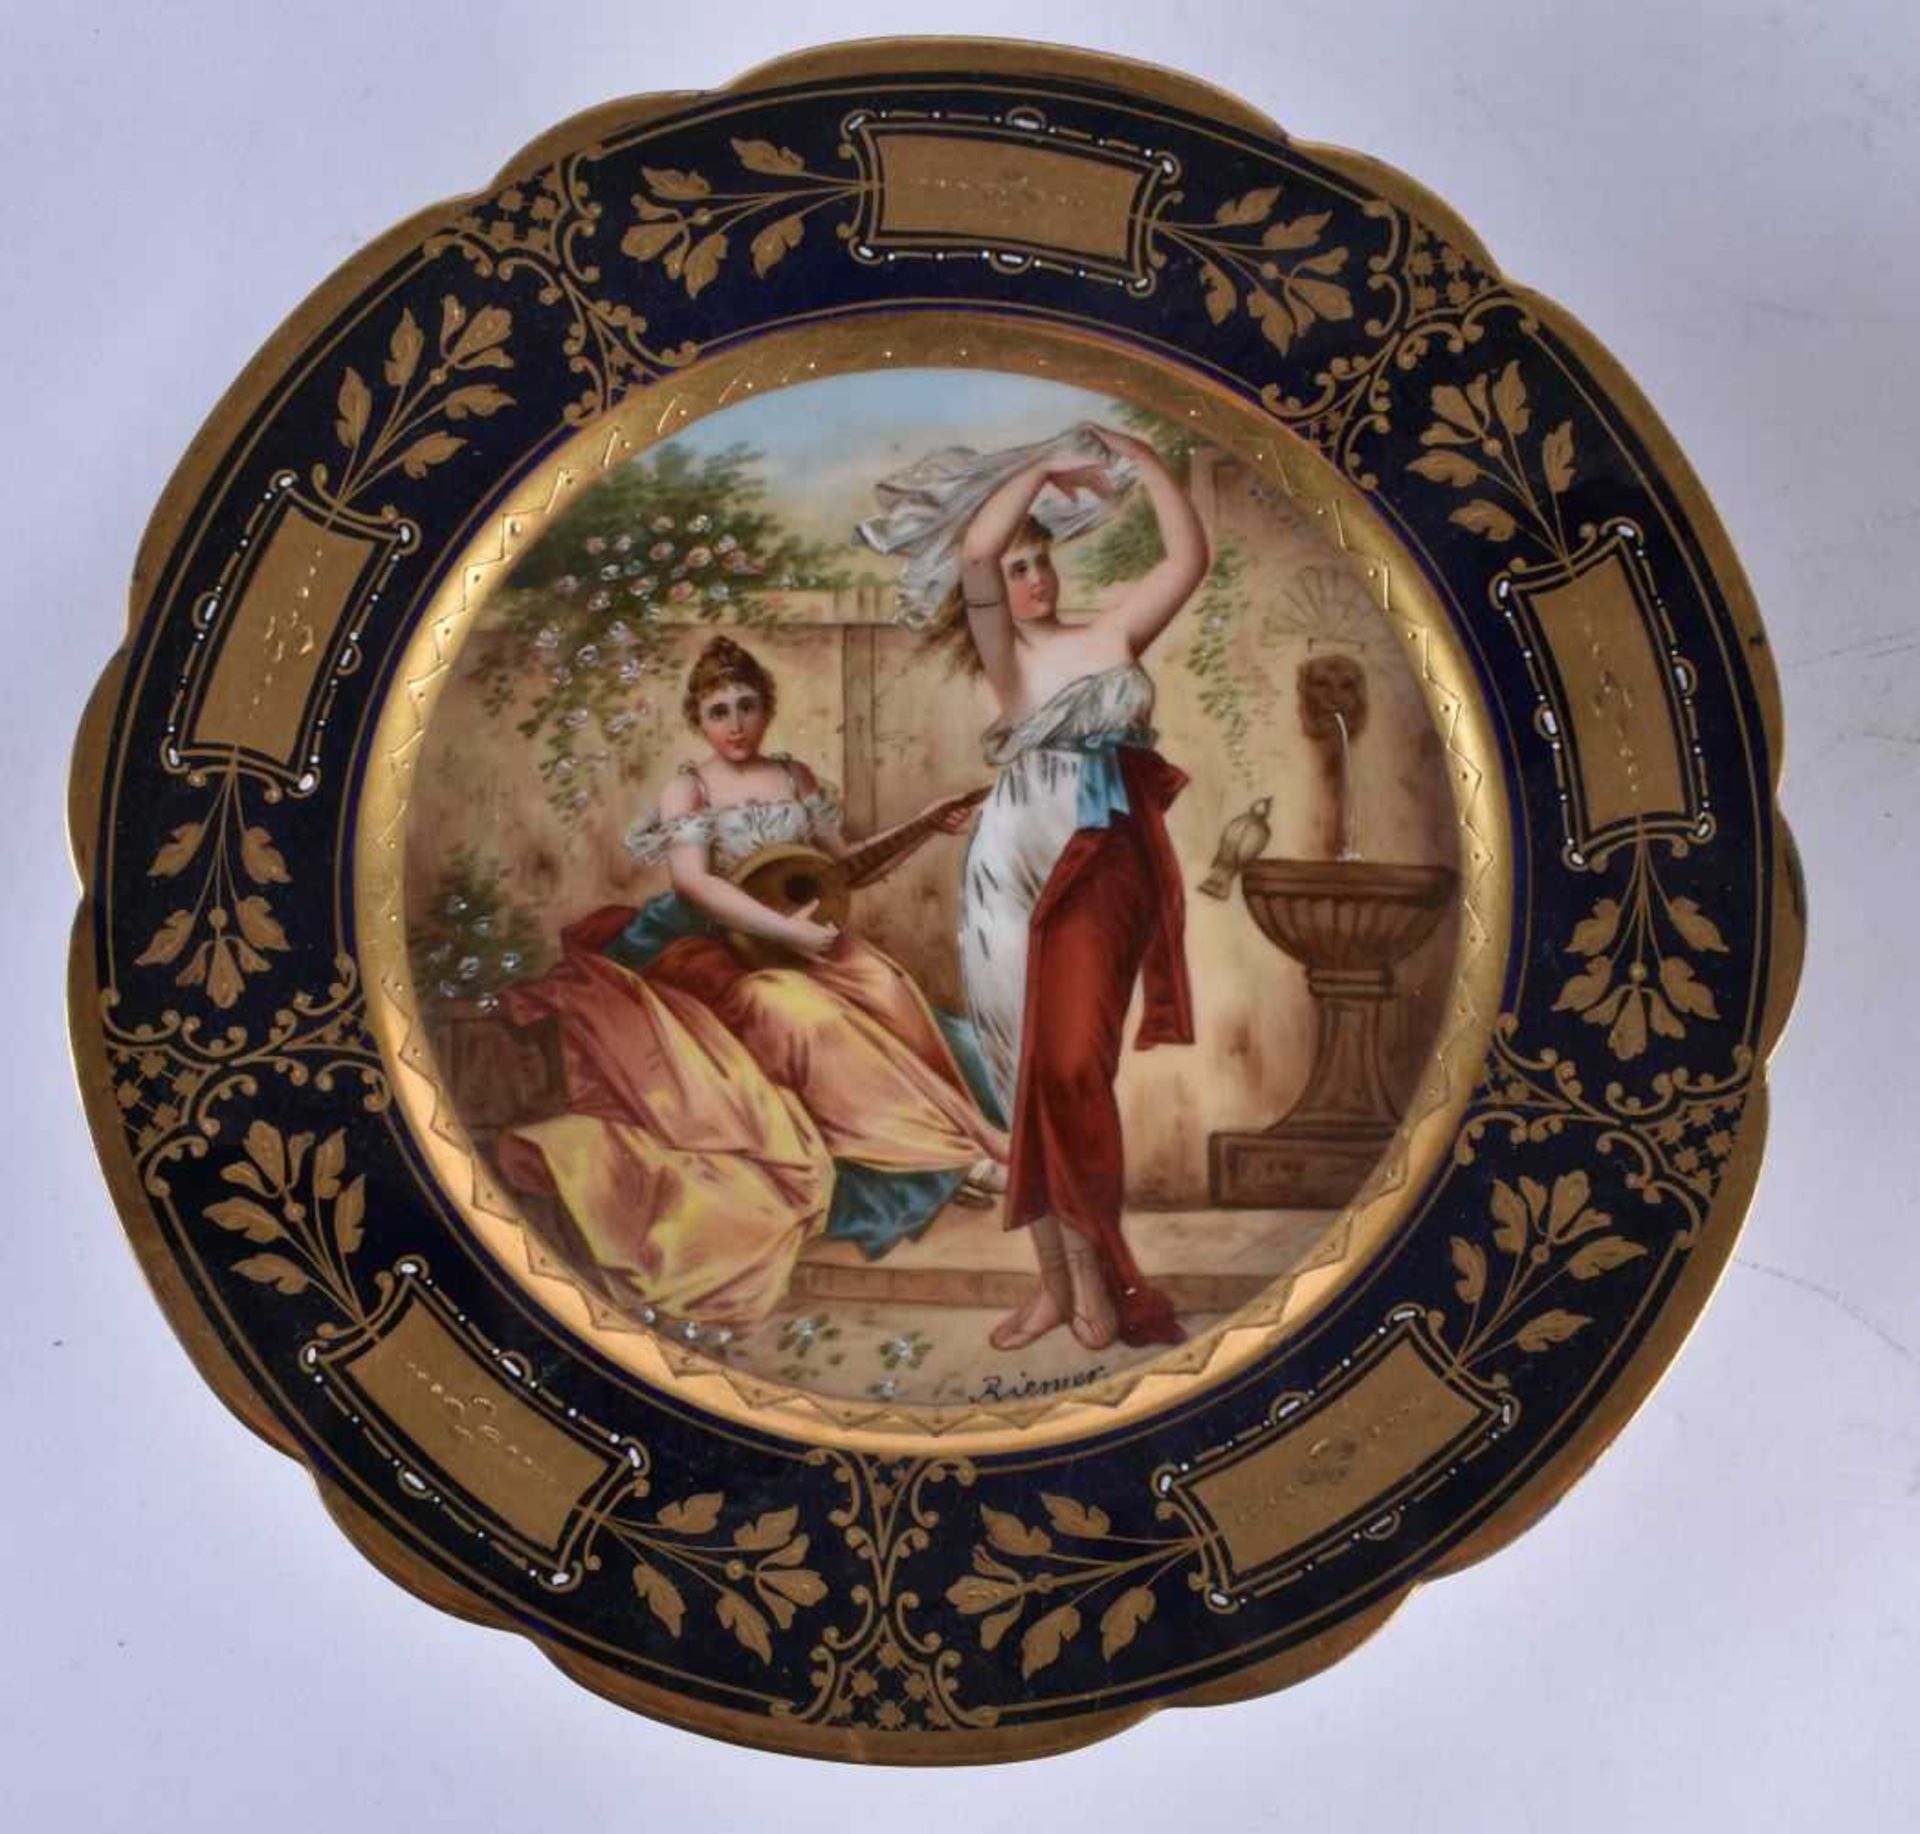 A GOOD EARLY 20TH CENTURY VIENNA PORCELAIN DESSERT SERVICE C1900 painted with figures and landscapes - Image 2 of 9